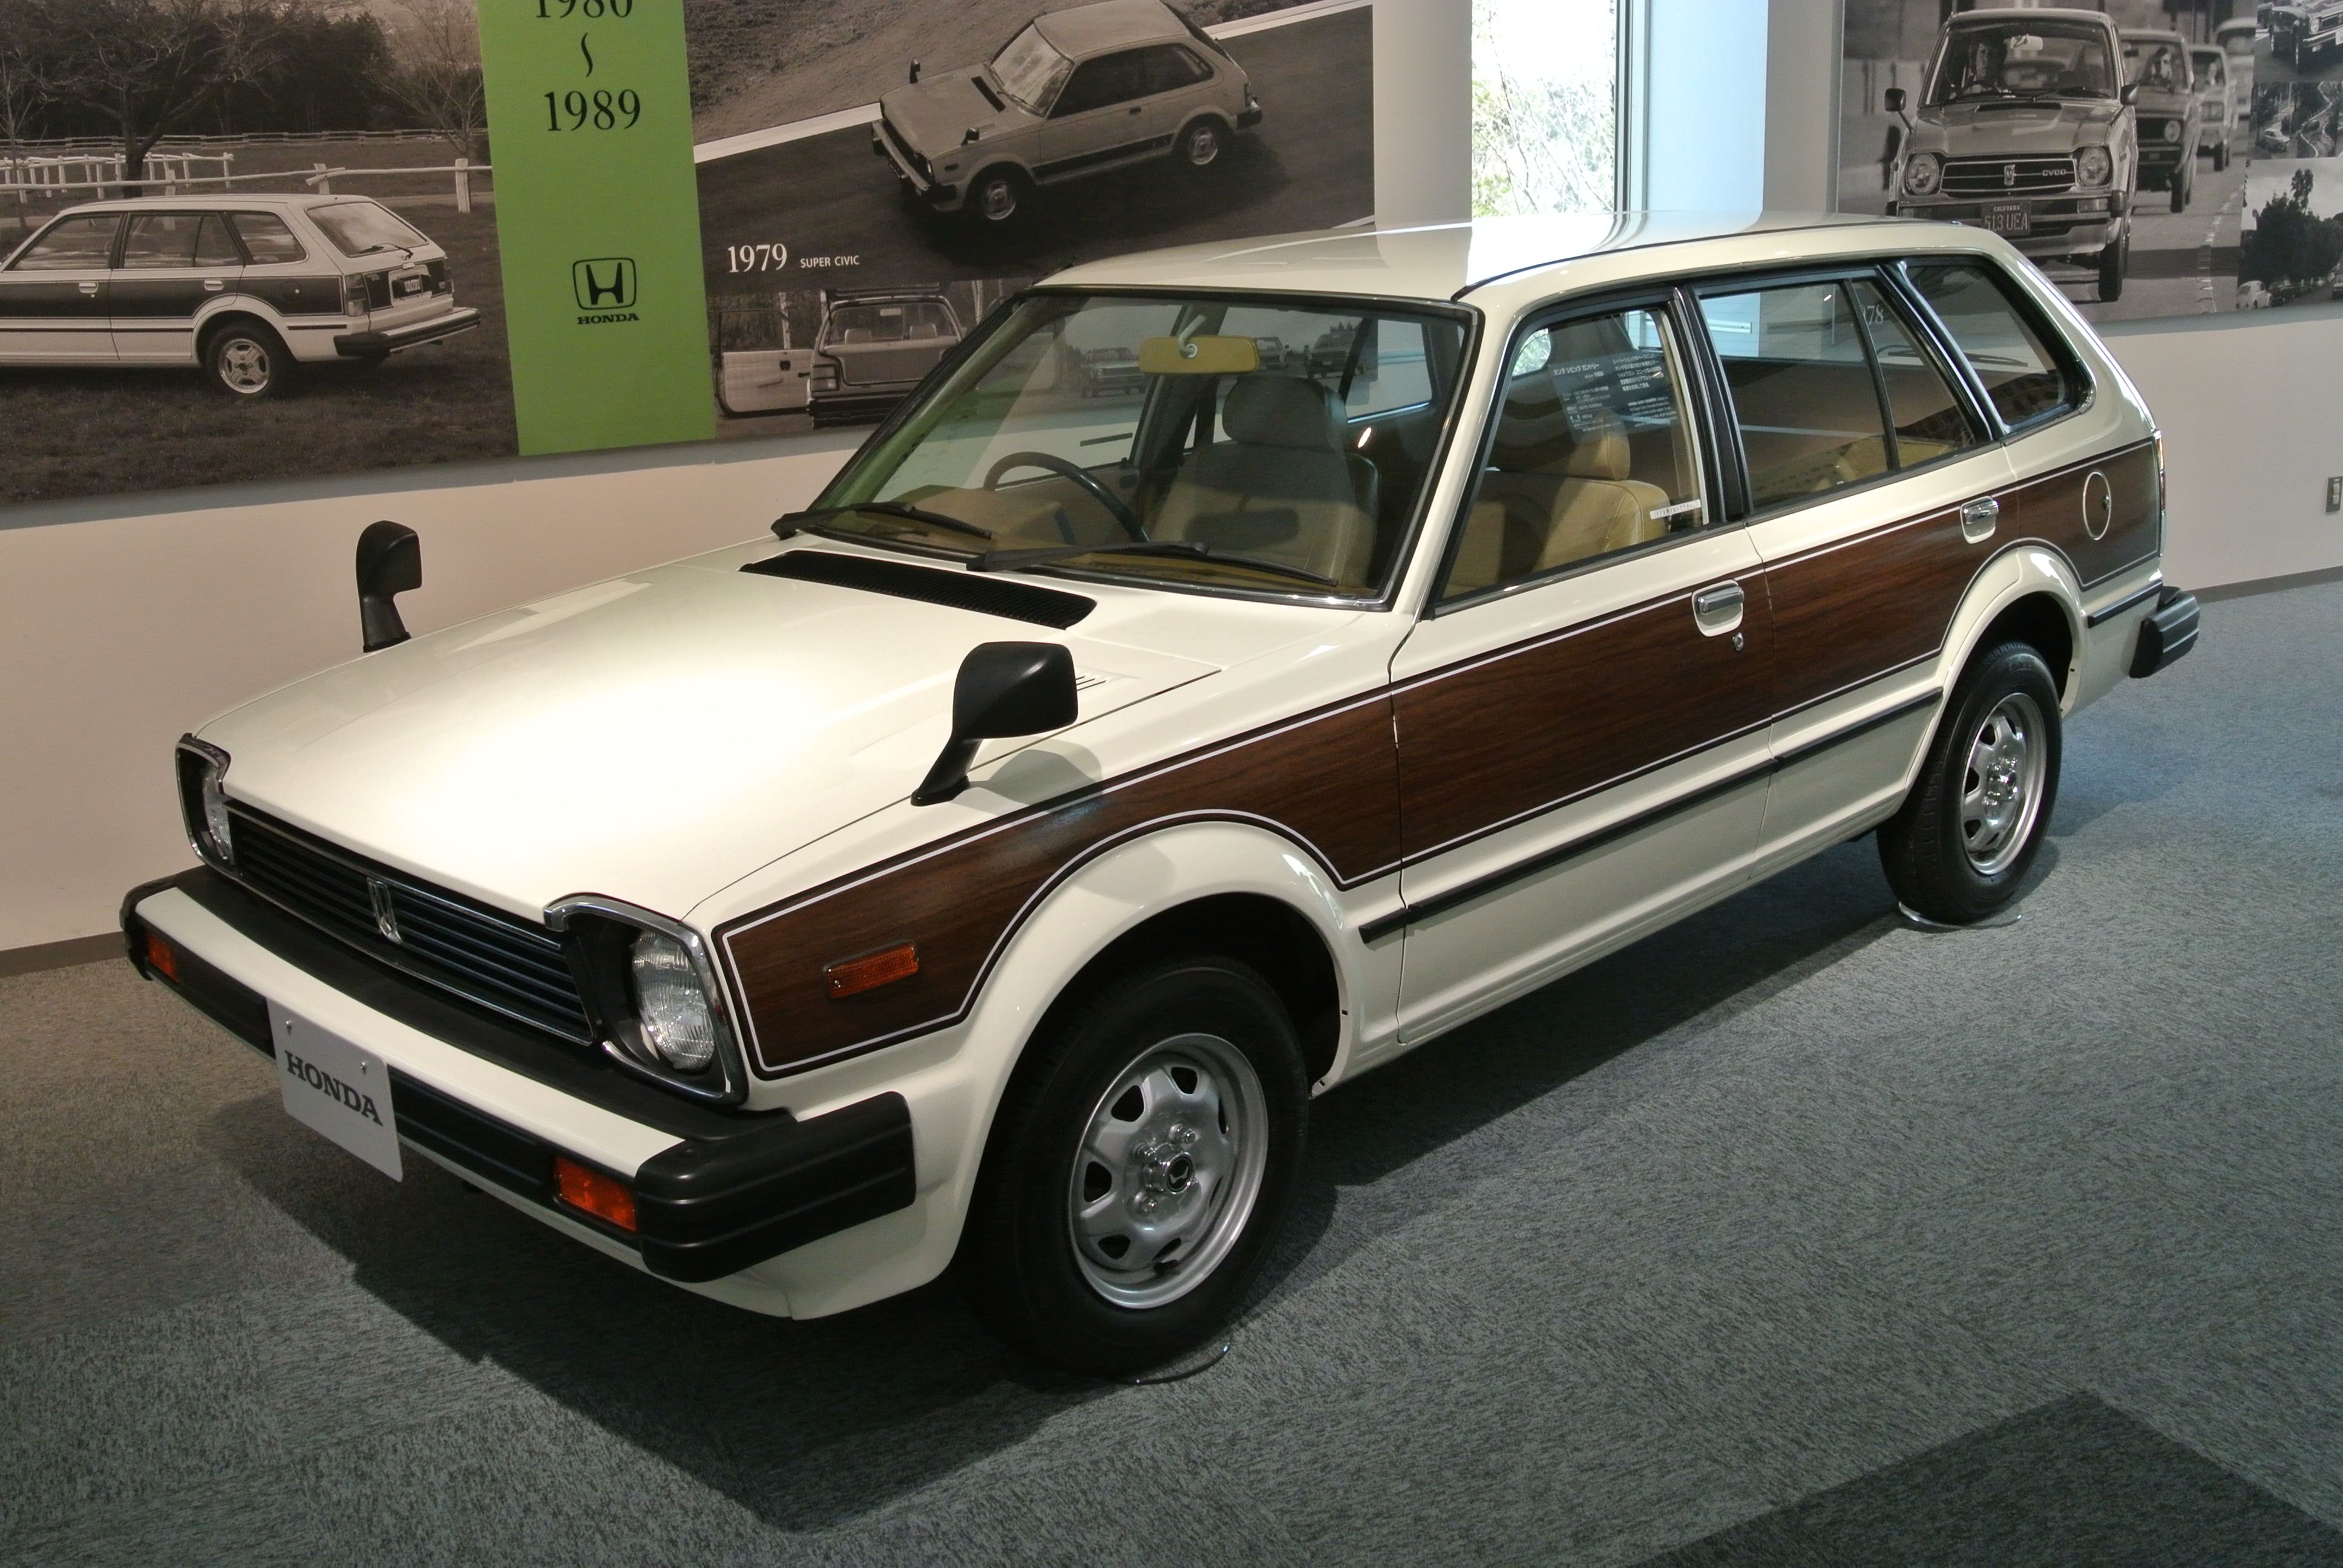 A 1980 Civc Country on display.